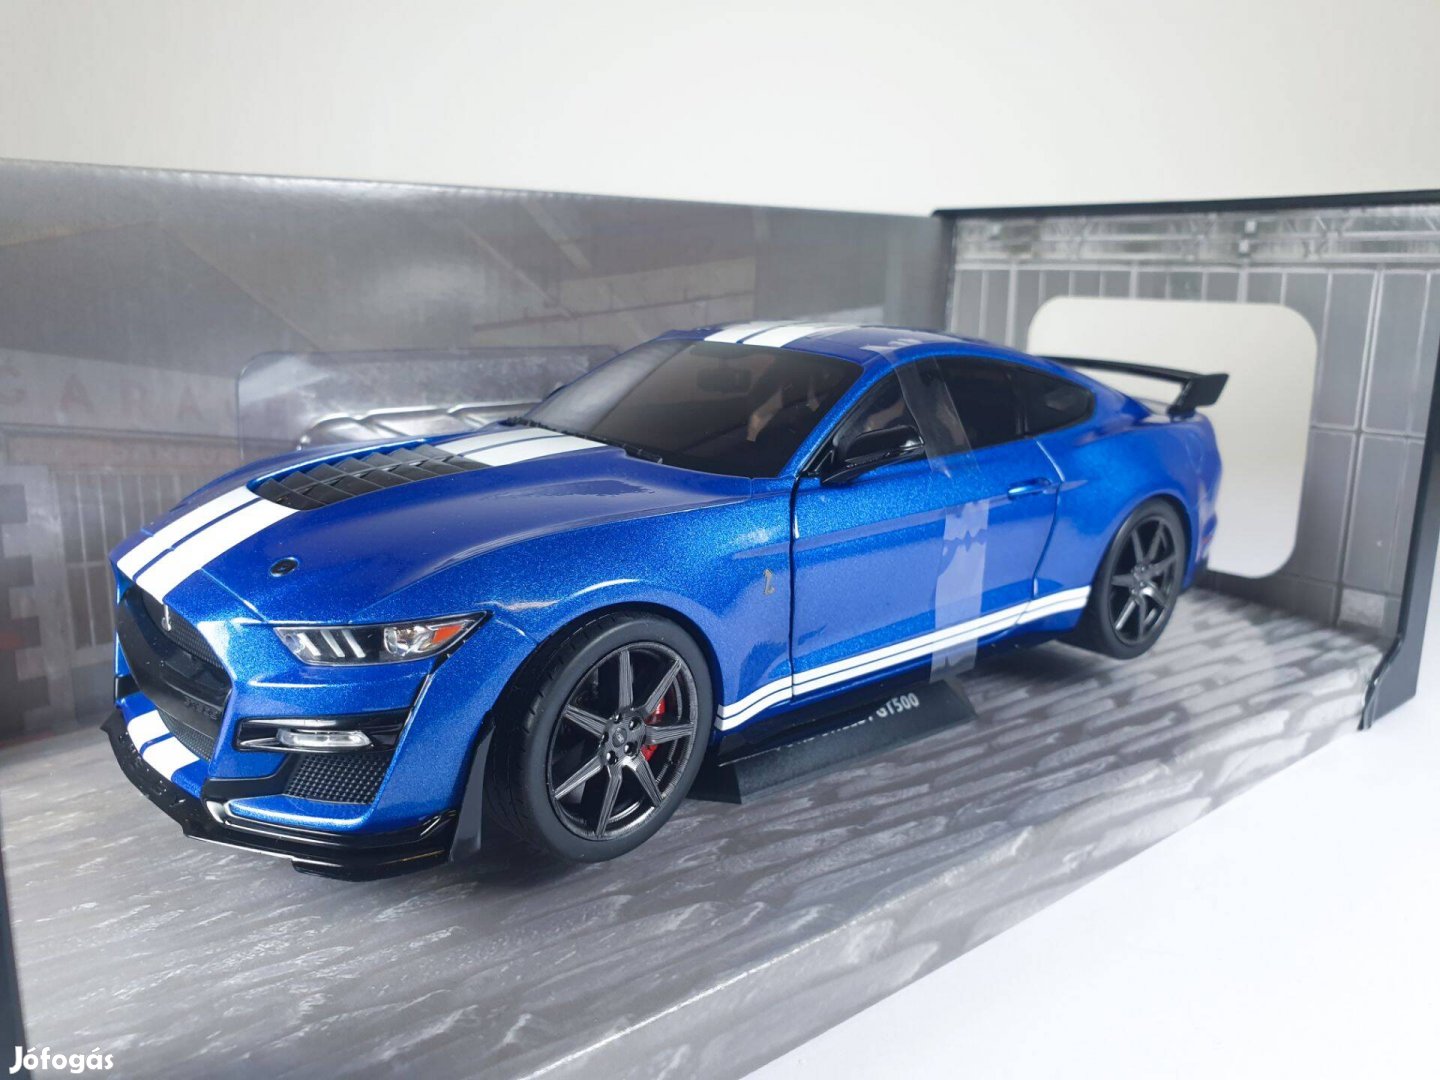 1:18 1/18 Solido Ford Mustang Shelby GT500